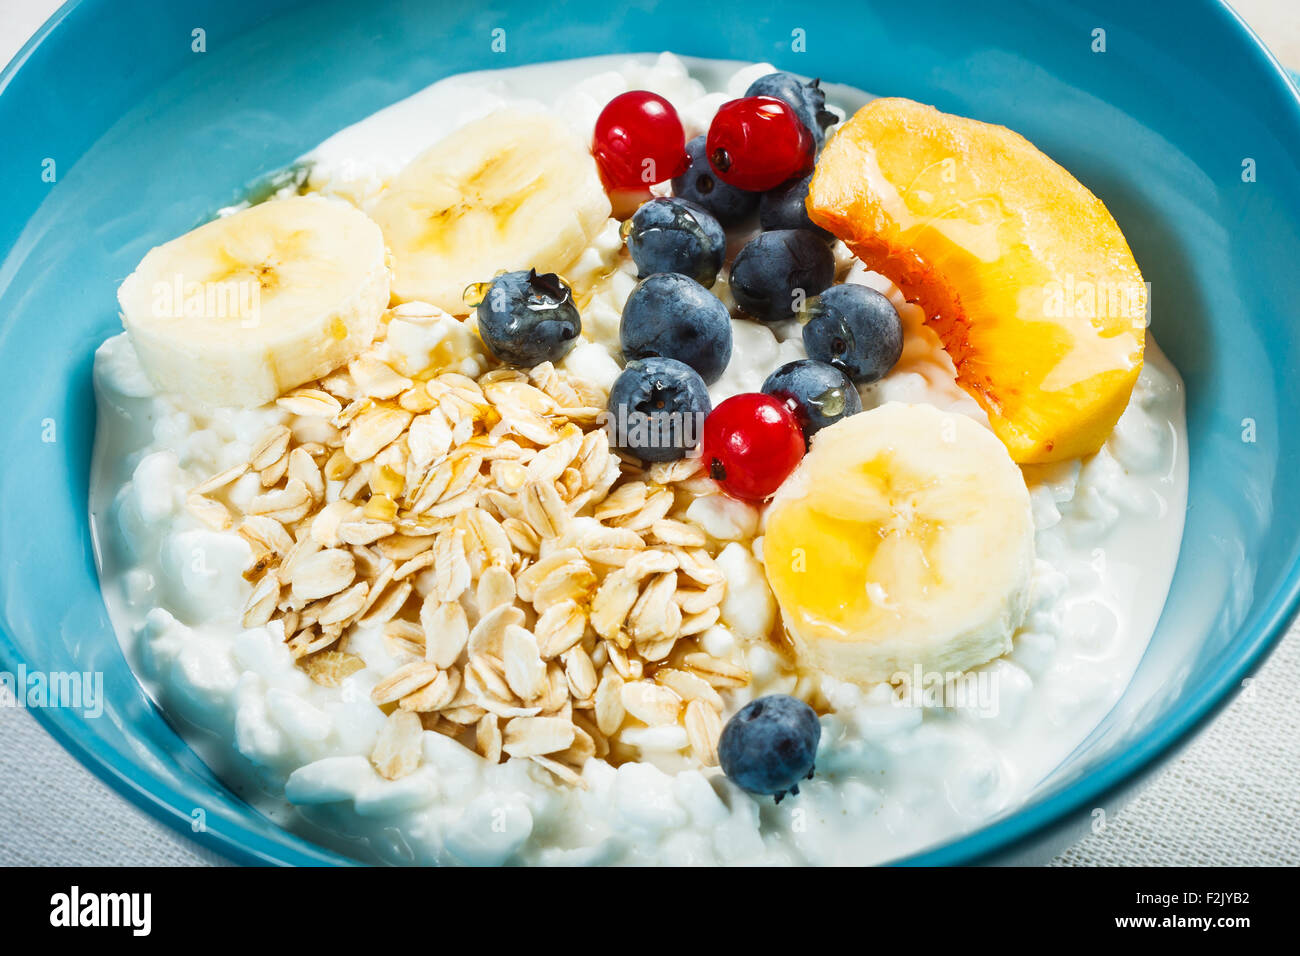 Healthy breakfast. Granulated cottage cheese plus oat flakes, banana, blueberries, red currant, peach and honey. Stock Photo